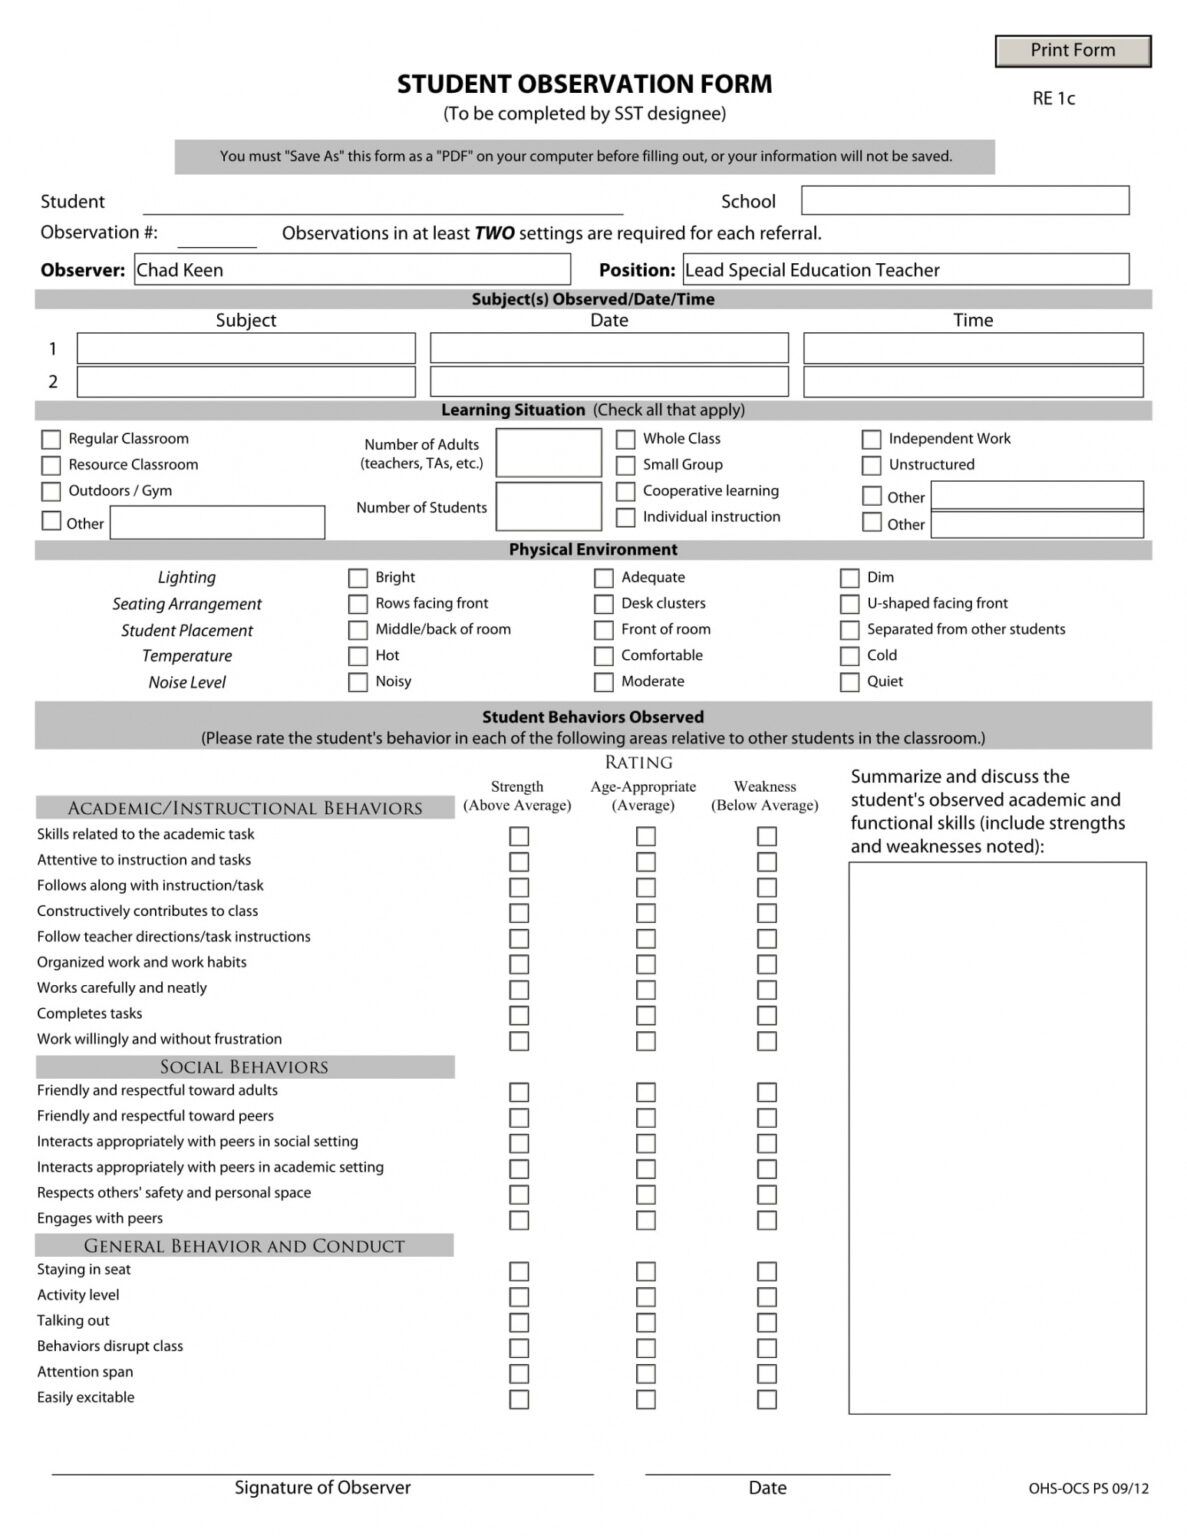 editable-free-4-student-observation-forms-in-pdf-ms-word-excel-student